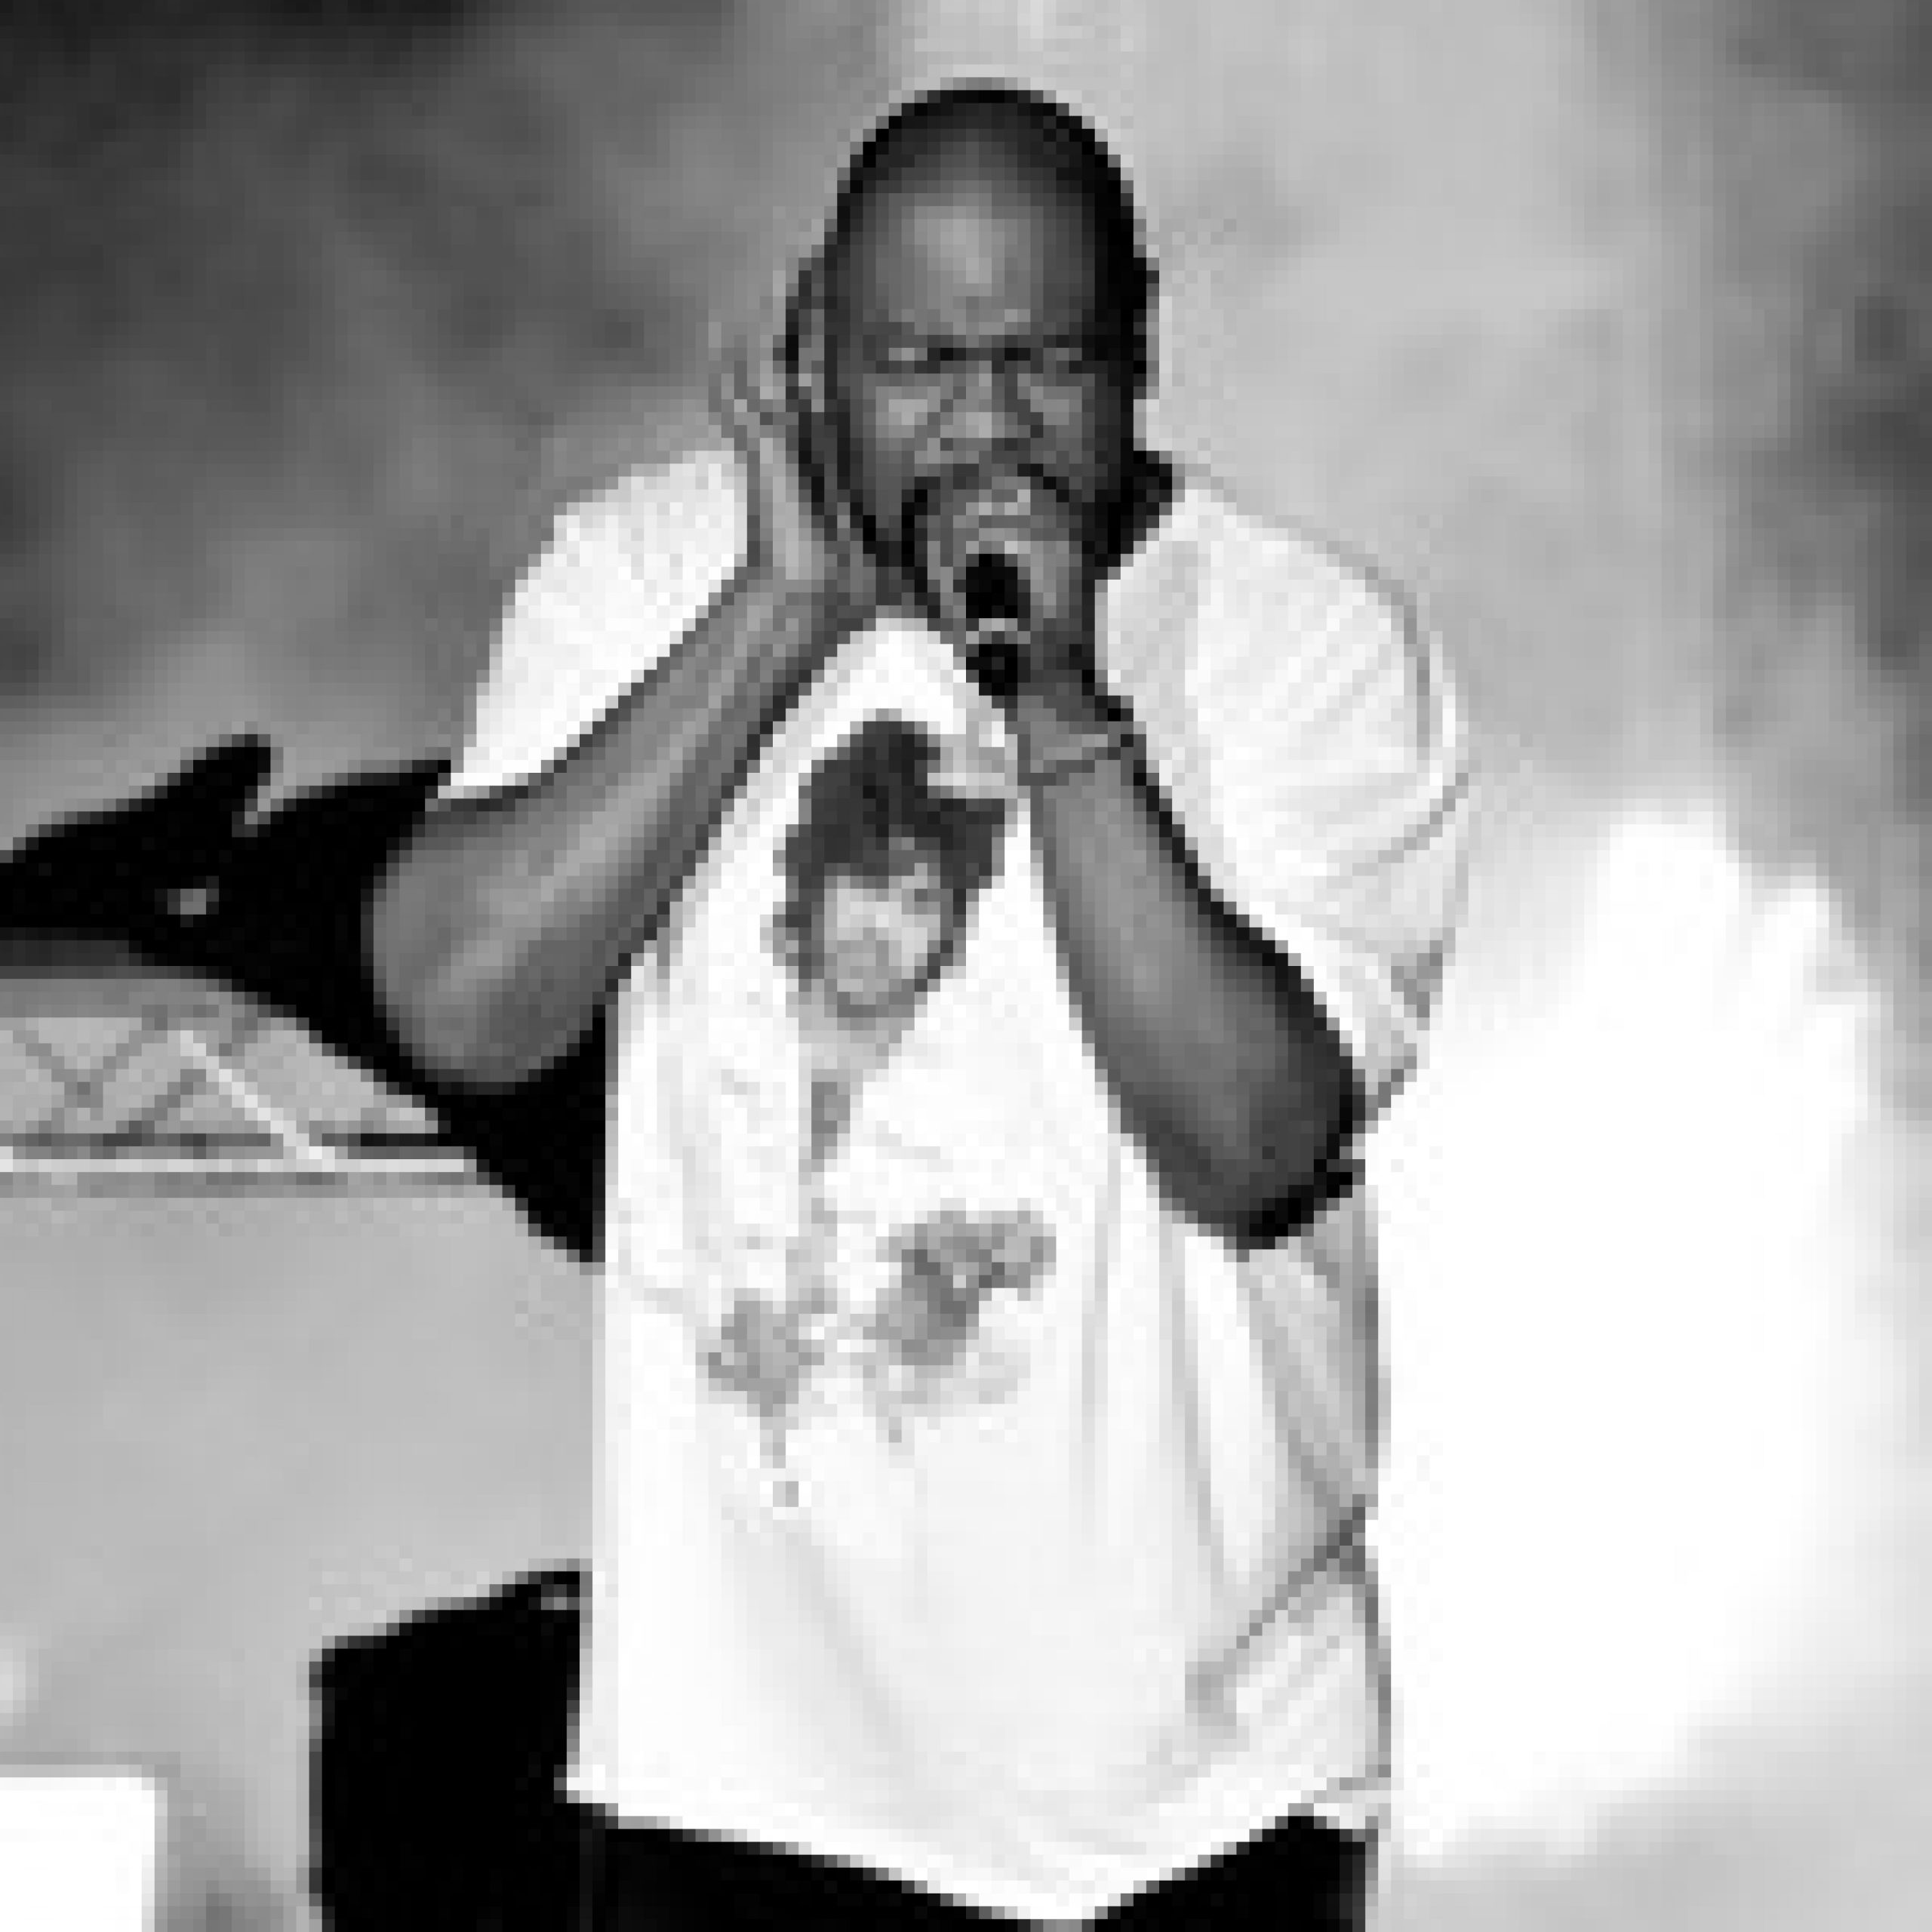 Biz Markie’s Death Mourned by Questlove, Q-Tip, Wyclef & More: ‘A True GOAT’